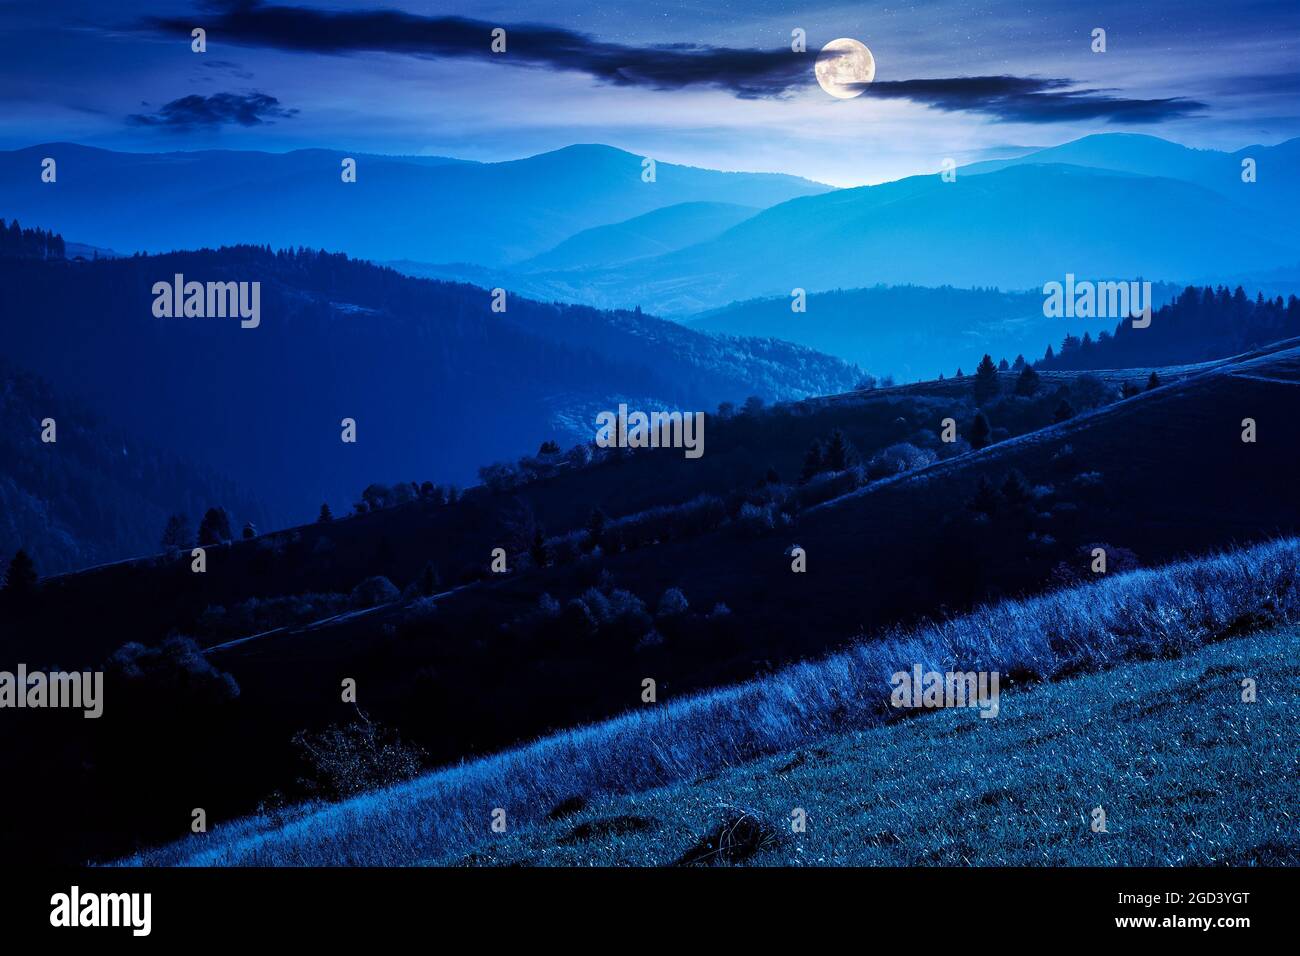 mountainous countryside landscape at night. grassy meadows and trees on hills rolling in to the distant ridge in full moon light Stock Photo